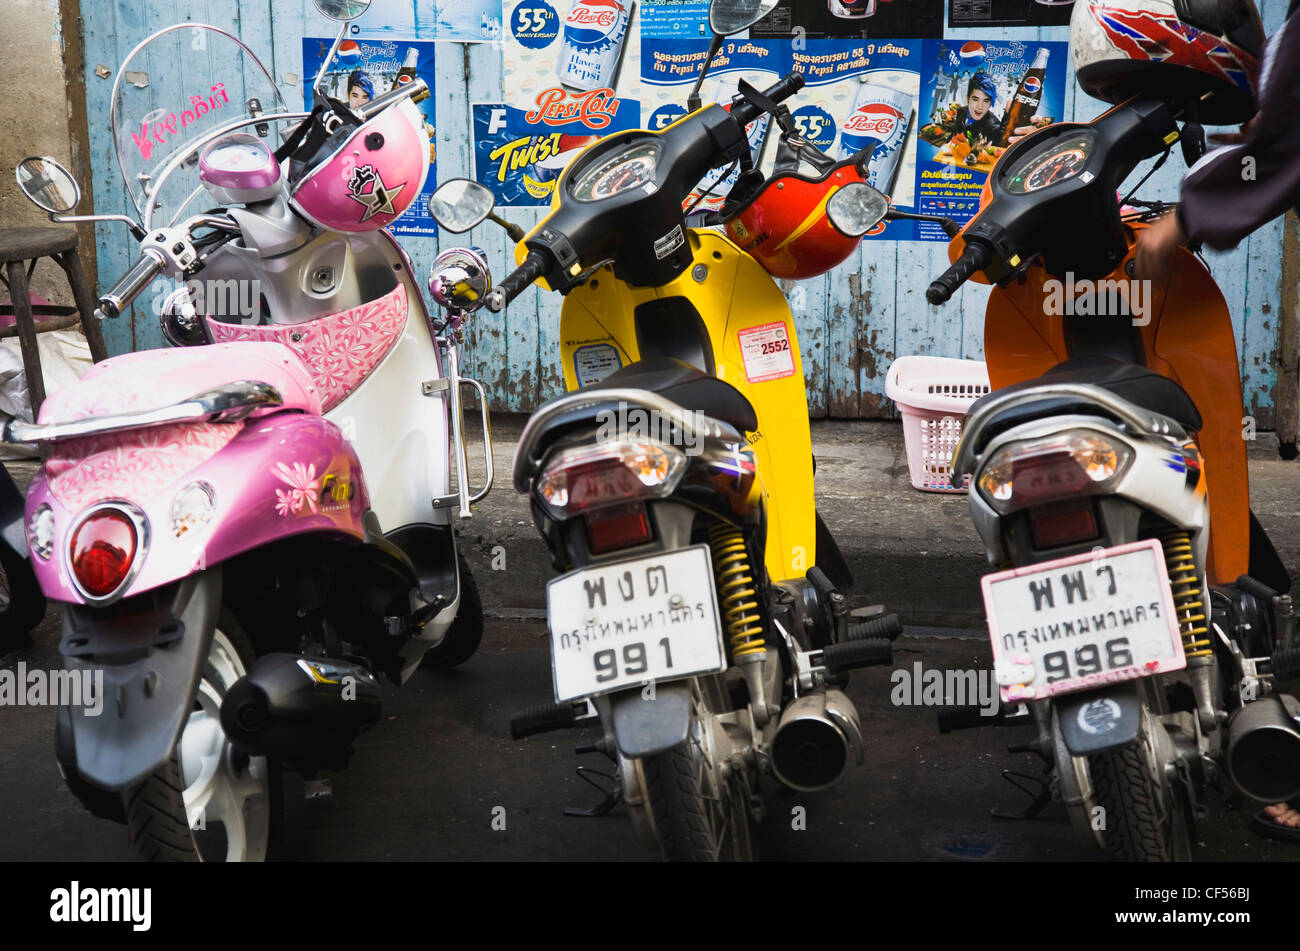 Brightly coloured motorcycle scooters and helmets Thailand Bangkok Asia asian Thailand thai motorcycle motorbike scooter Stock Photo